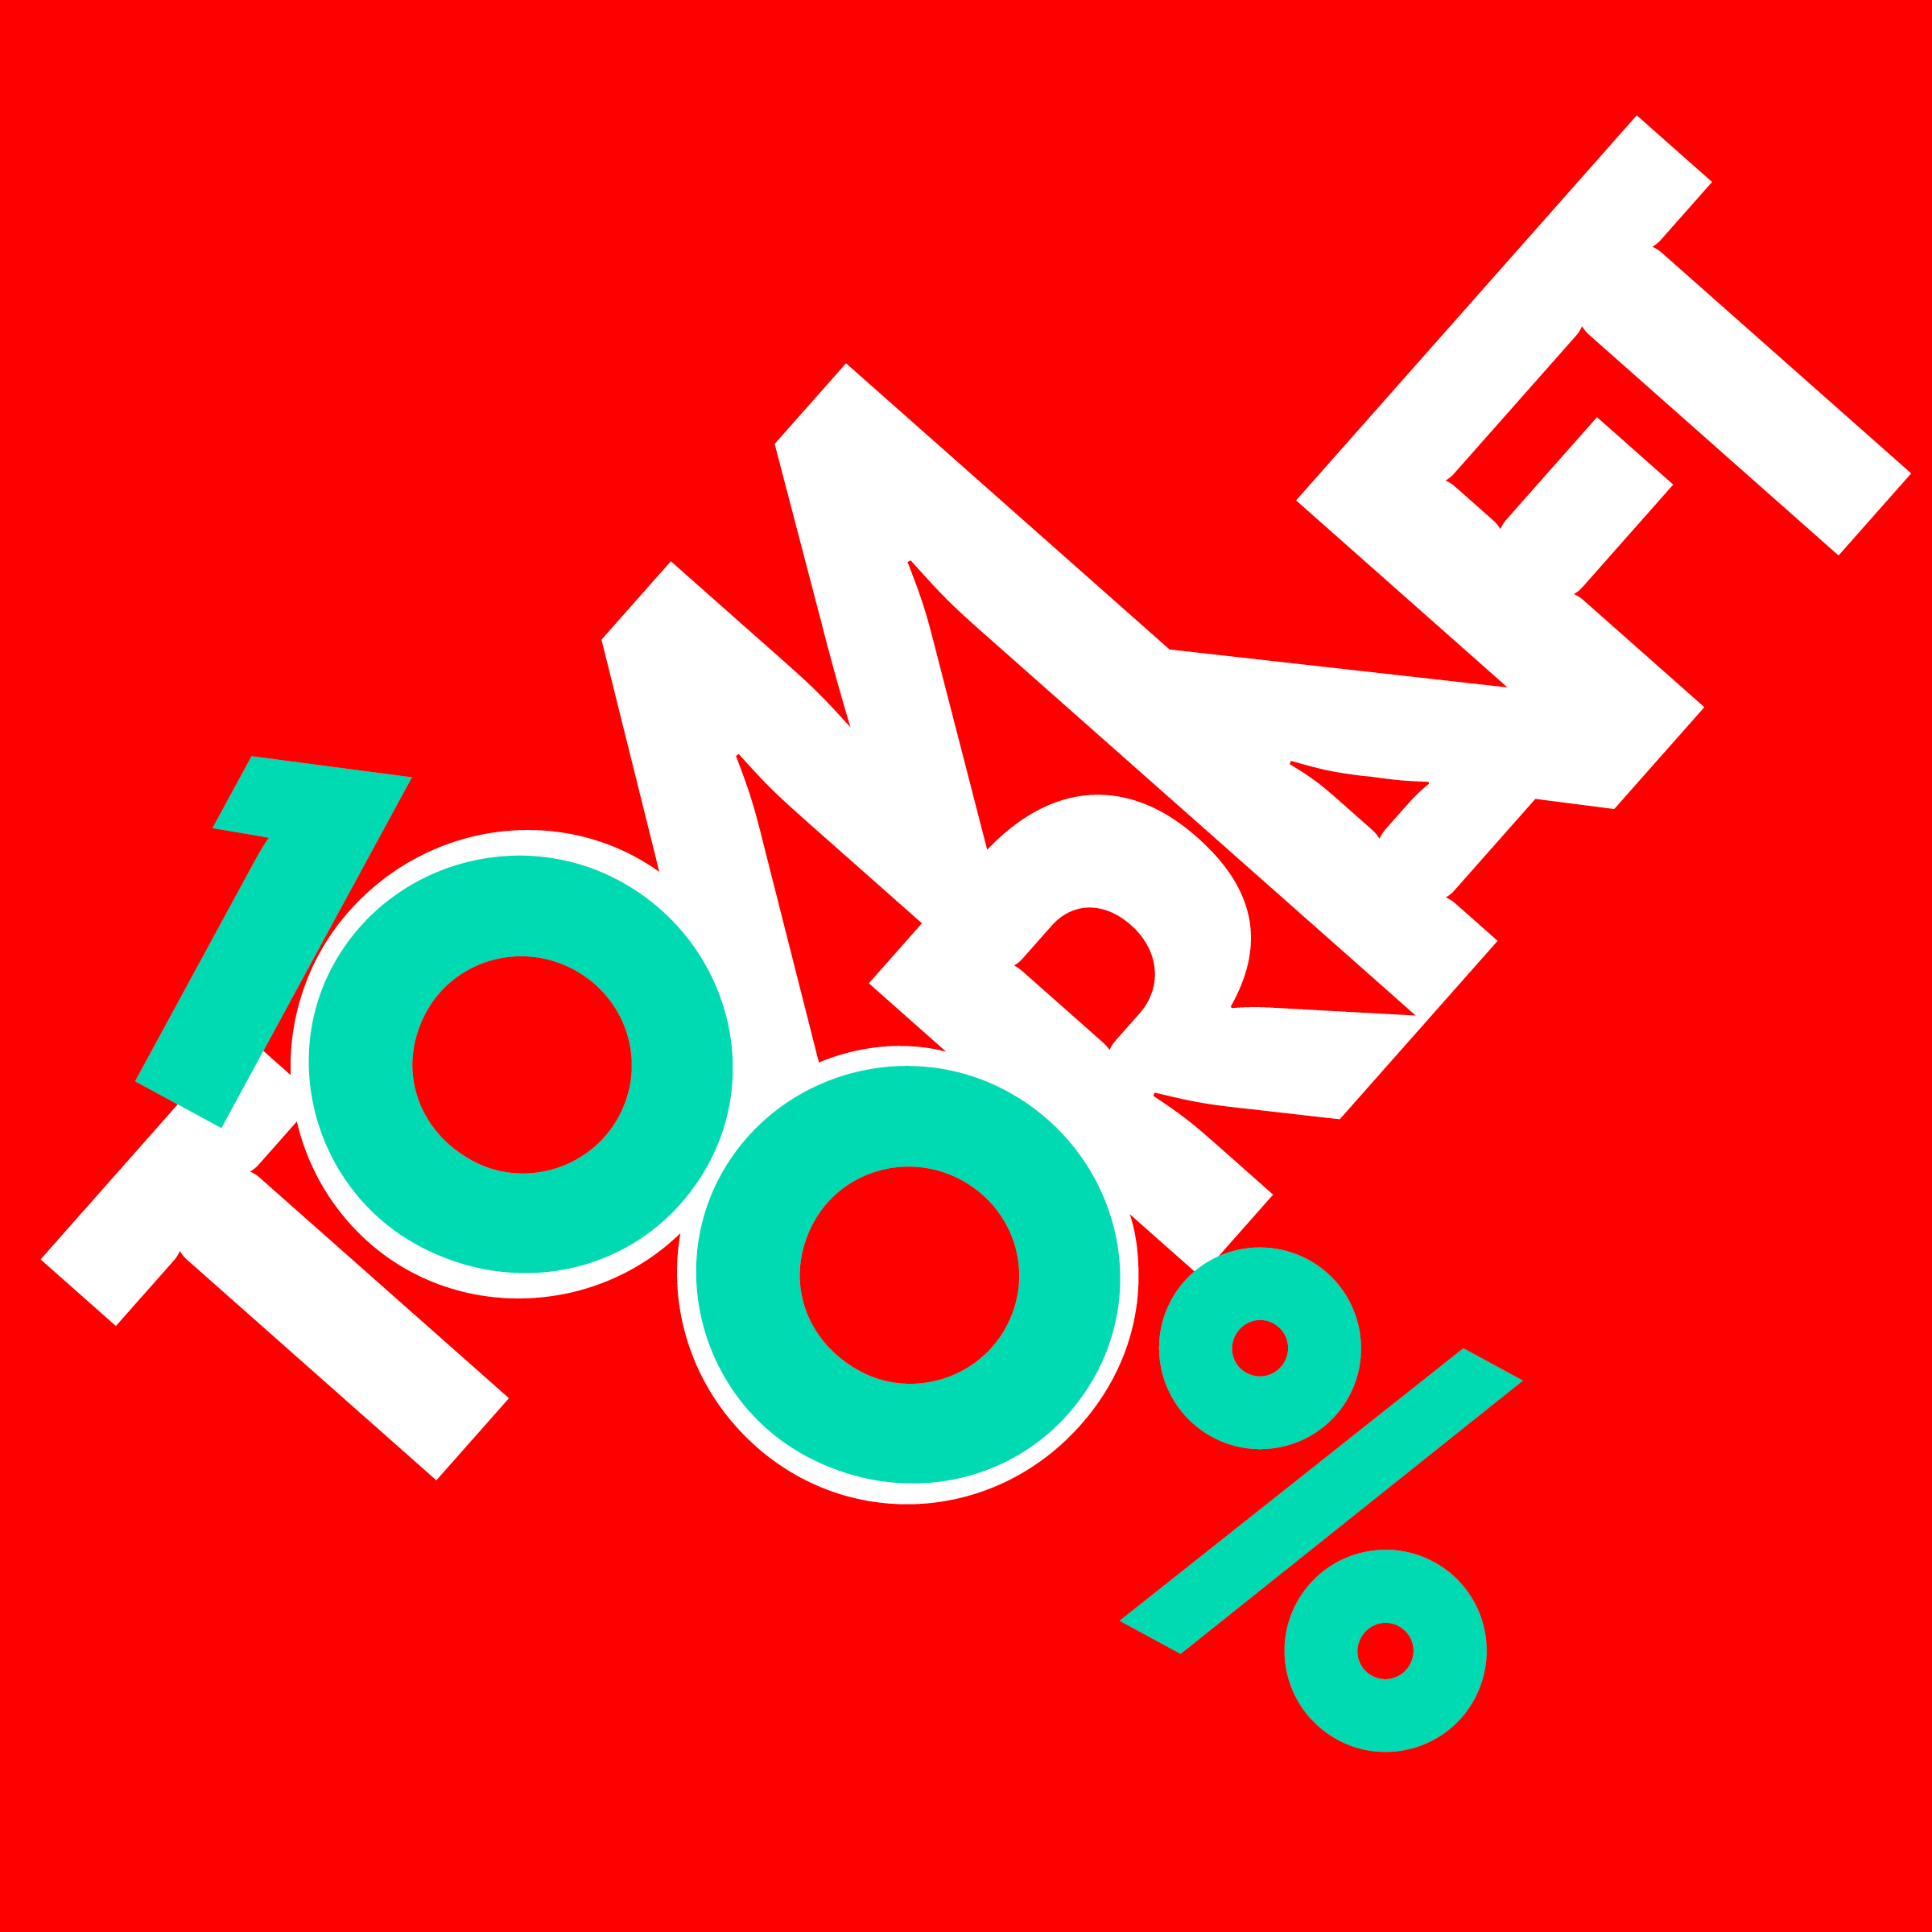 100% Tomcraft - In The Mix